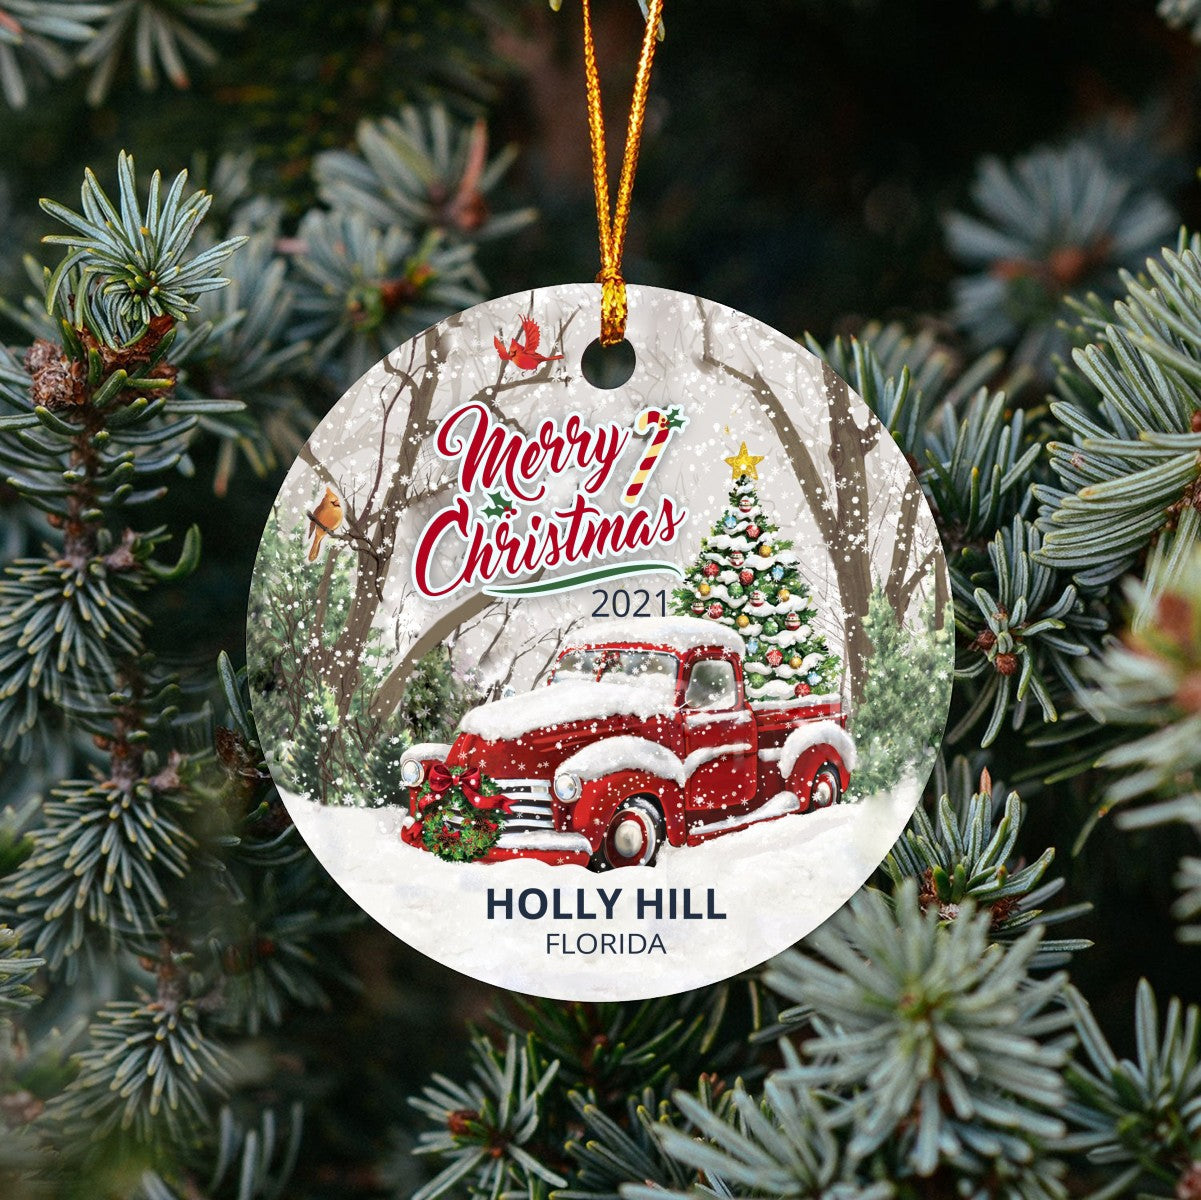 Christmas Tree Ornaments Holly Hill - Ornament With Name City, State Holly Hill Florida FL Ornament - Red Truck Xmas Ornaments 3'' Plastic Gift For Family, Friend And Housewarming